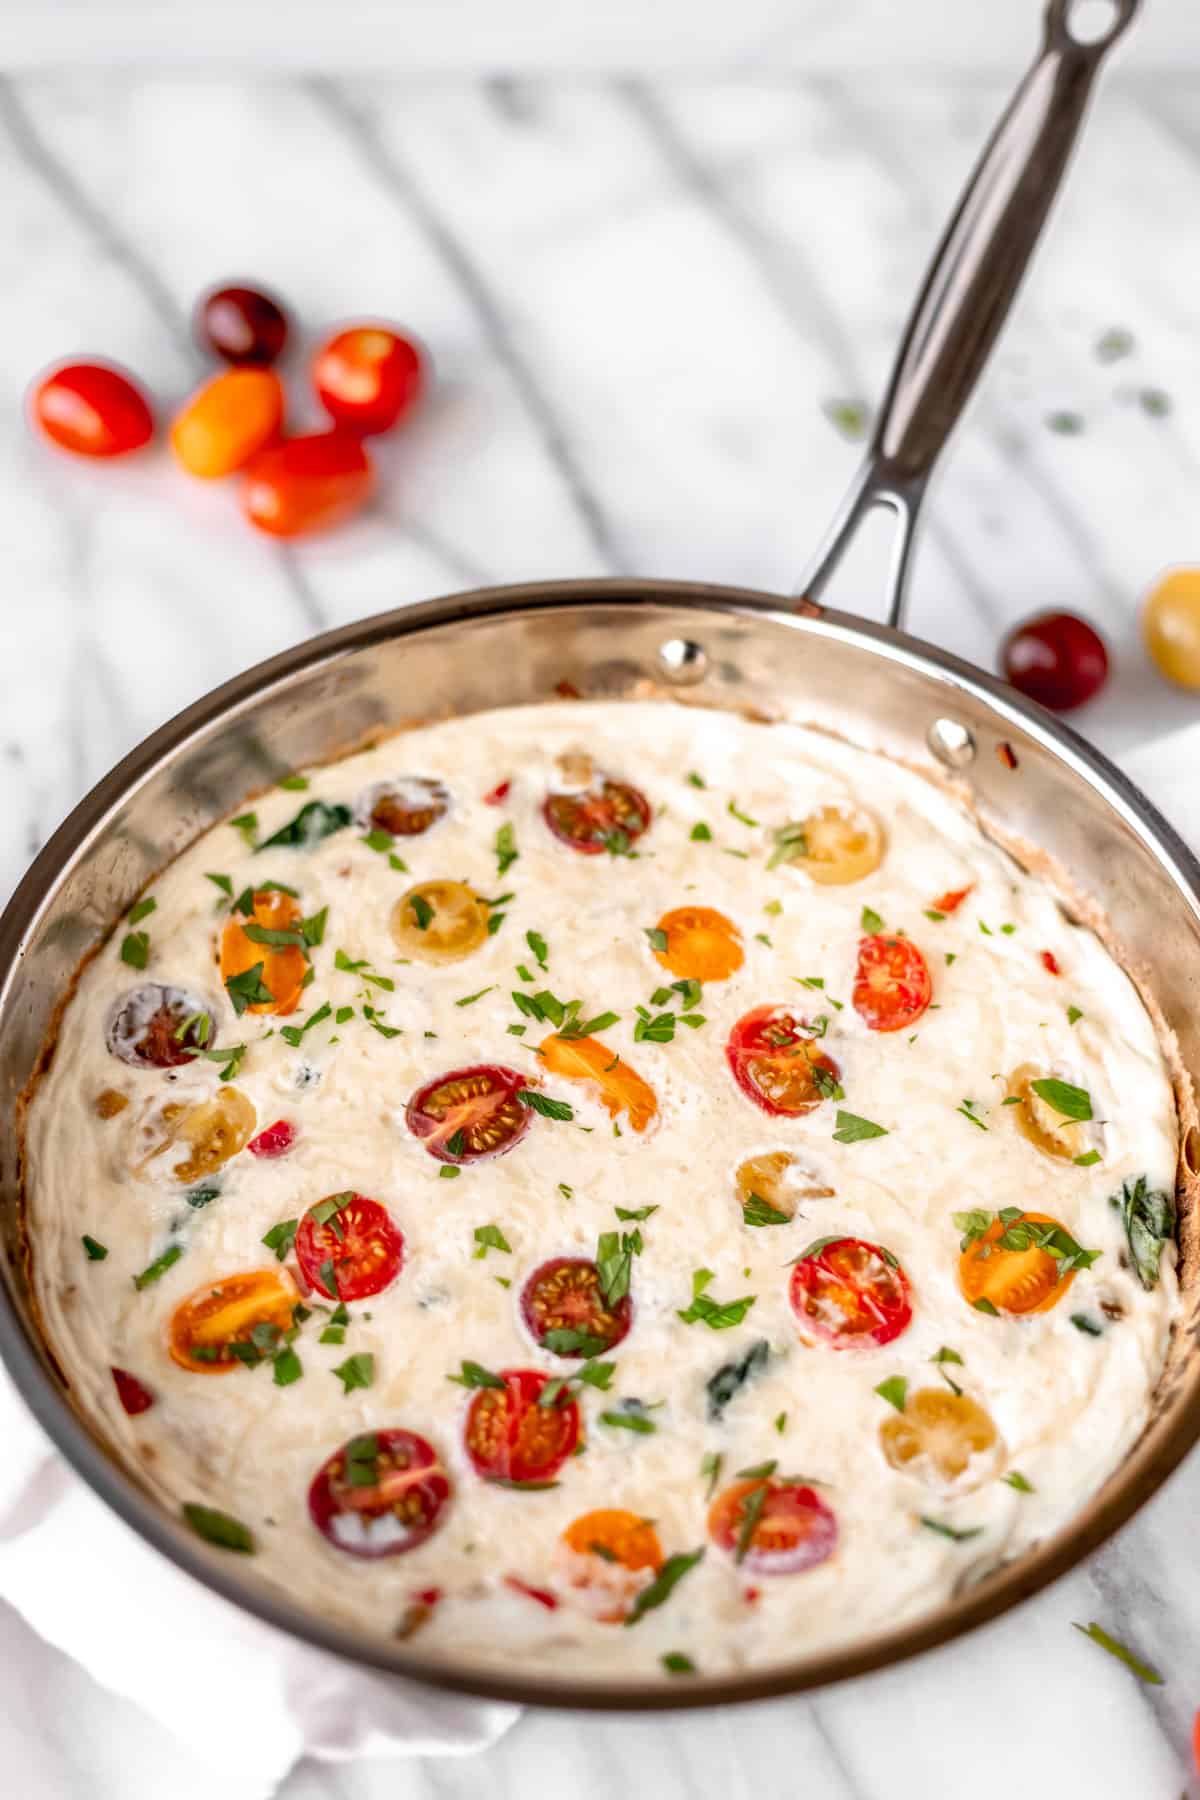 An egg white frittata with vegetables in a silver skillet with red, orange, purple and yellow tomatoes around it.